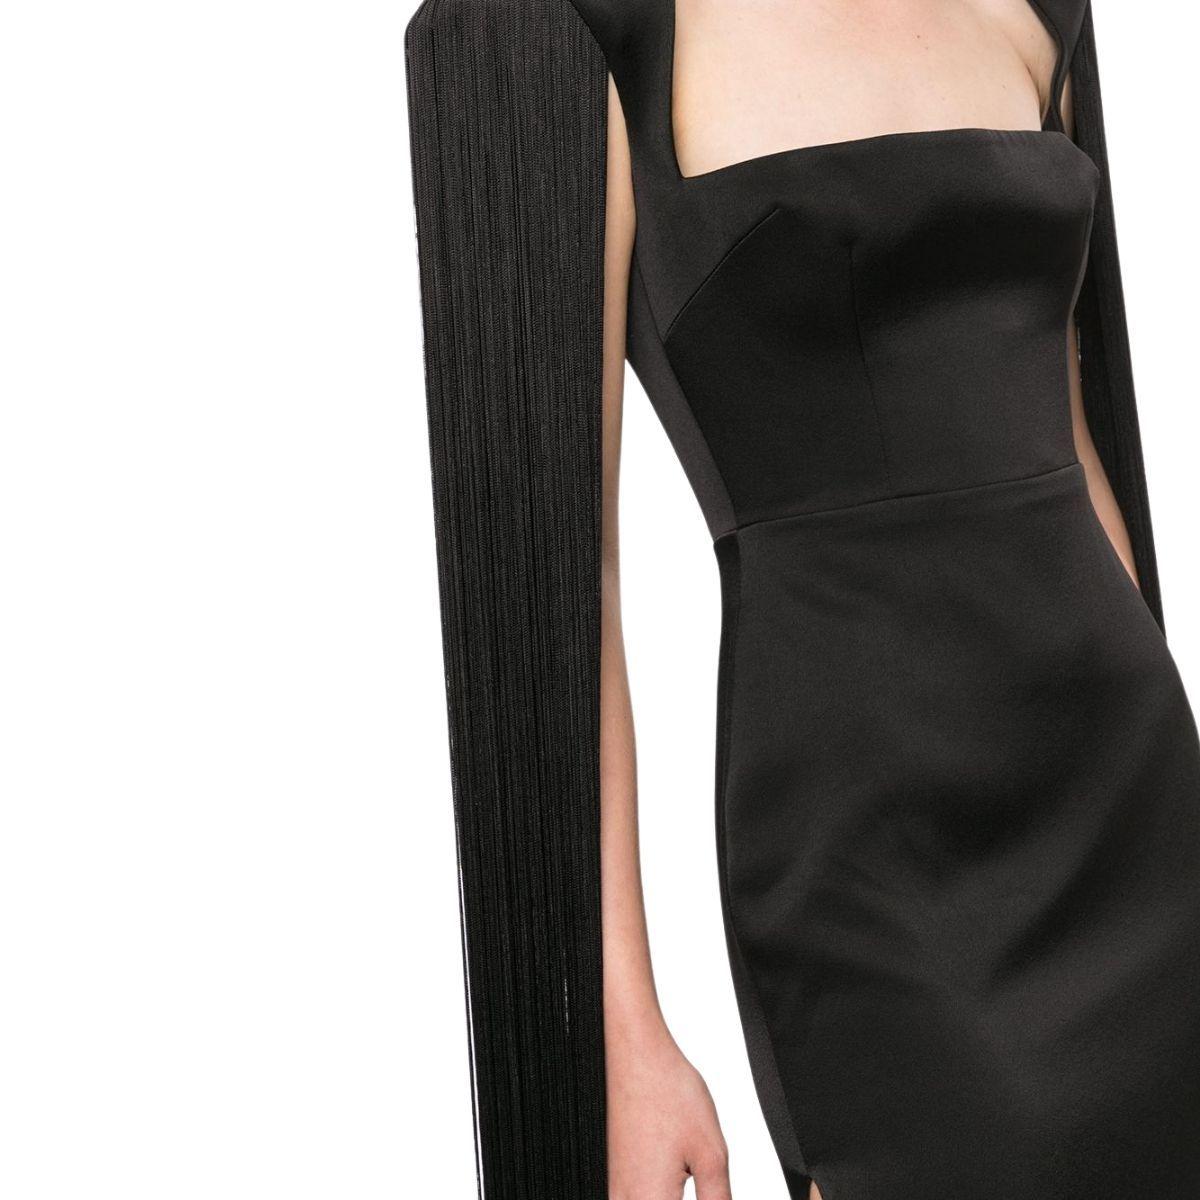 alex perry black gown